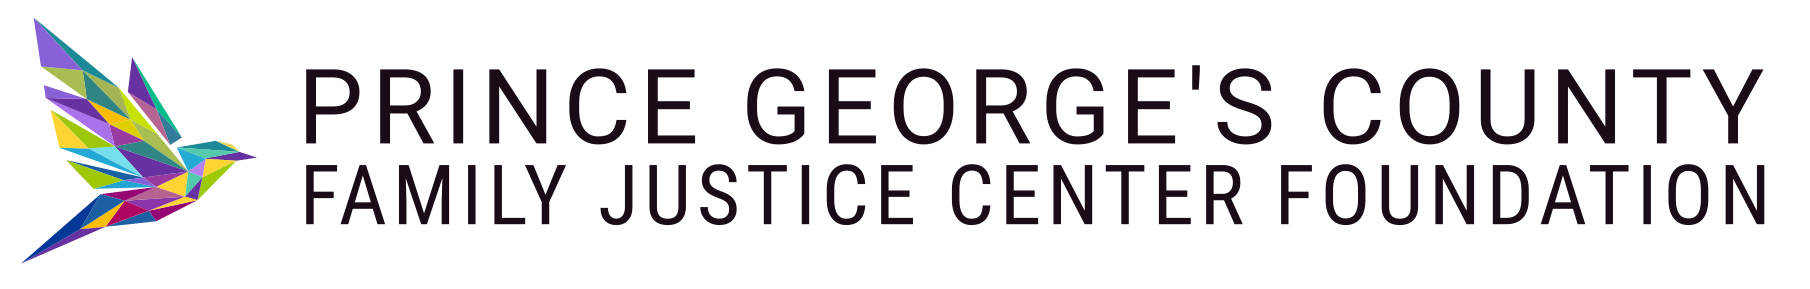 Prince George's County family Justice Center Foundation